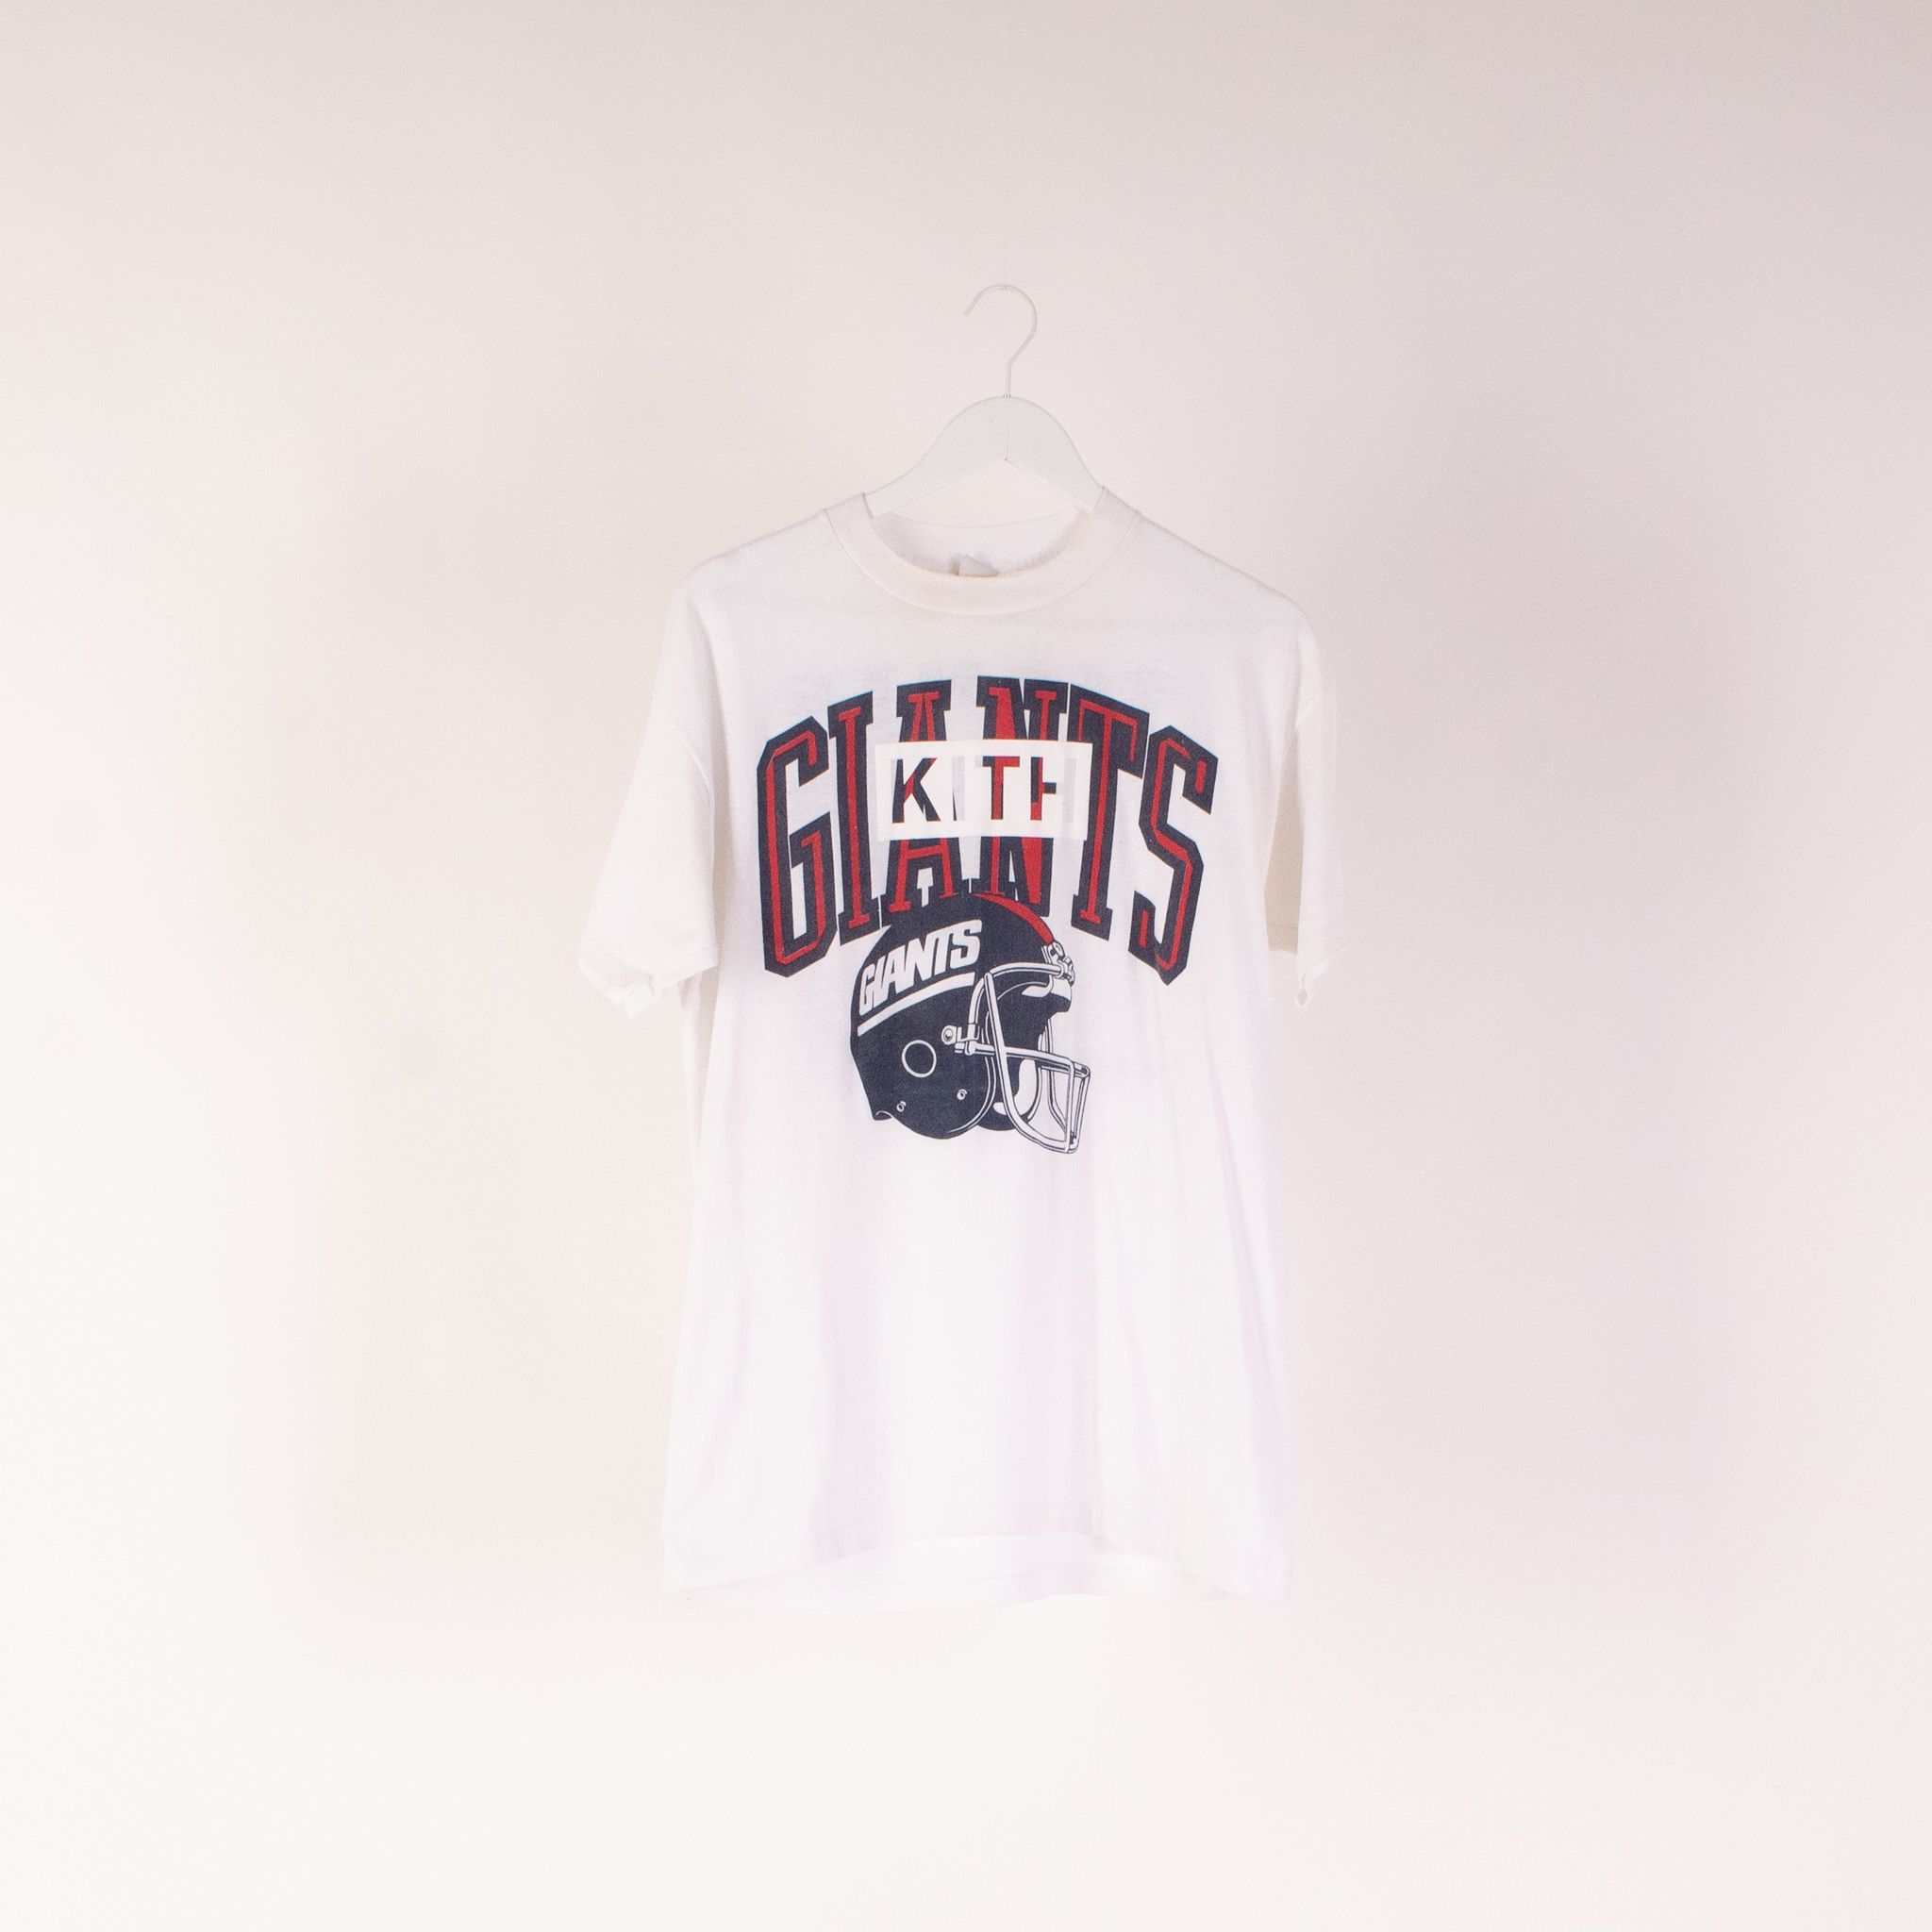 Vintage NY Giants x KITH Tee by Emily Oberg | Basic.Space